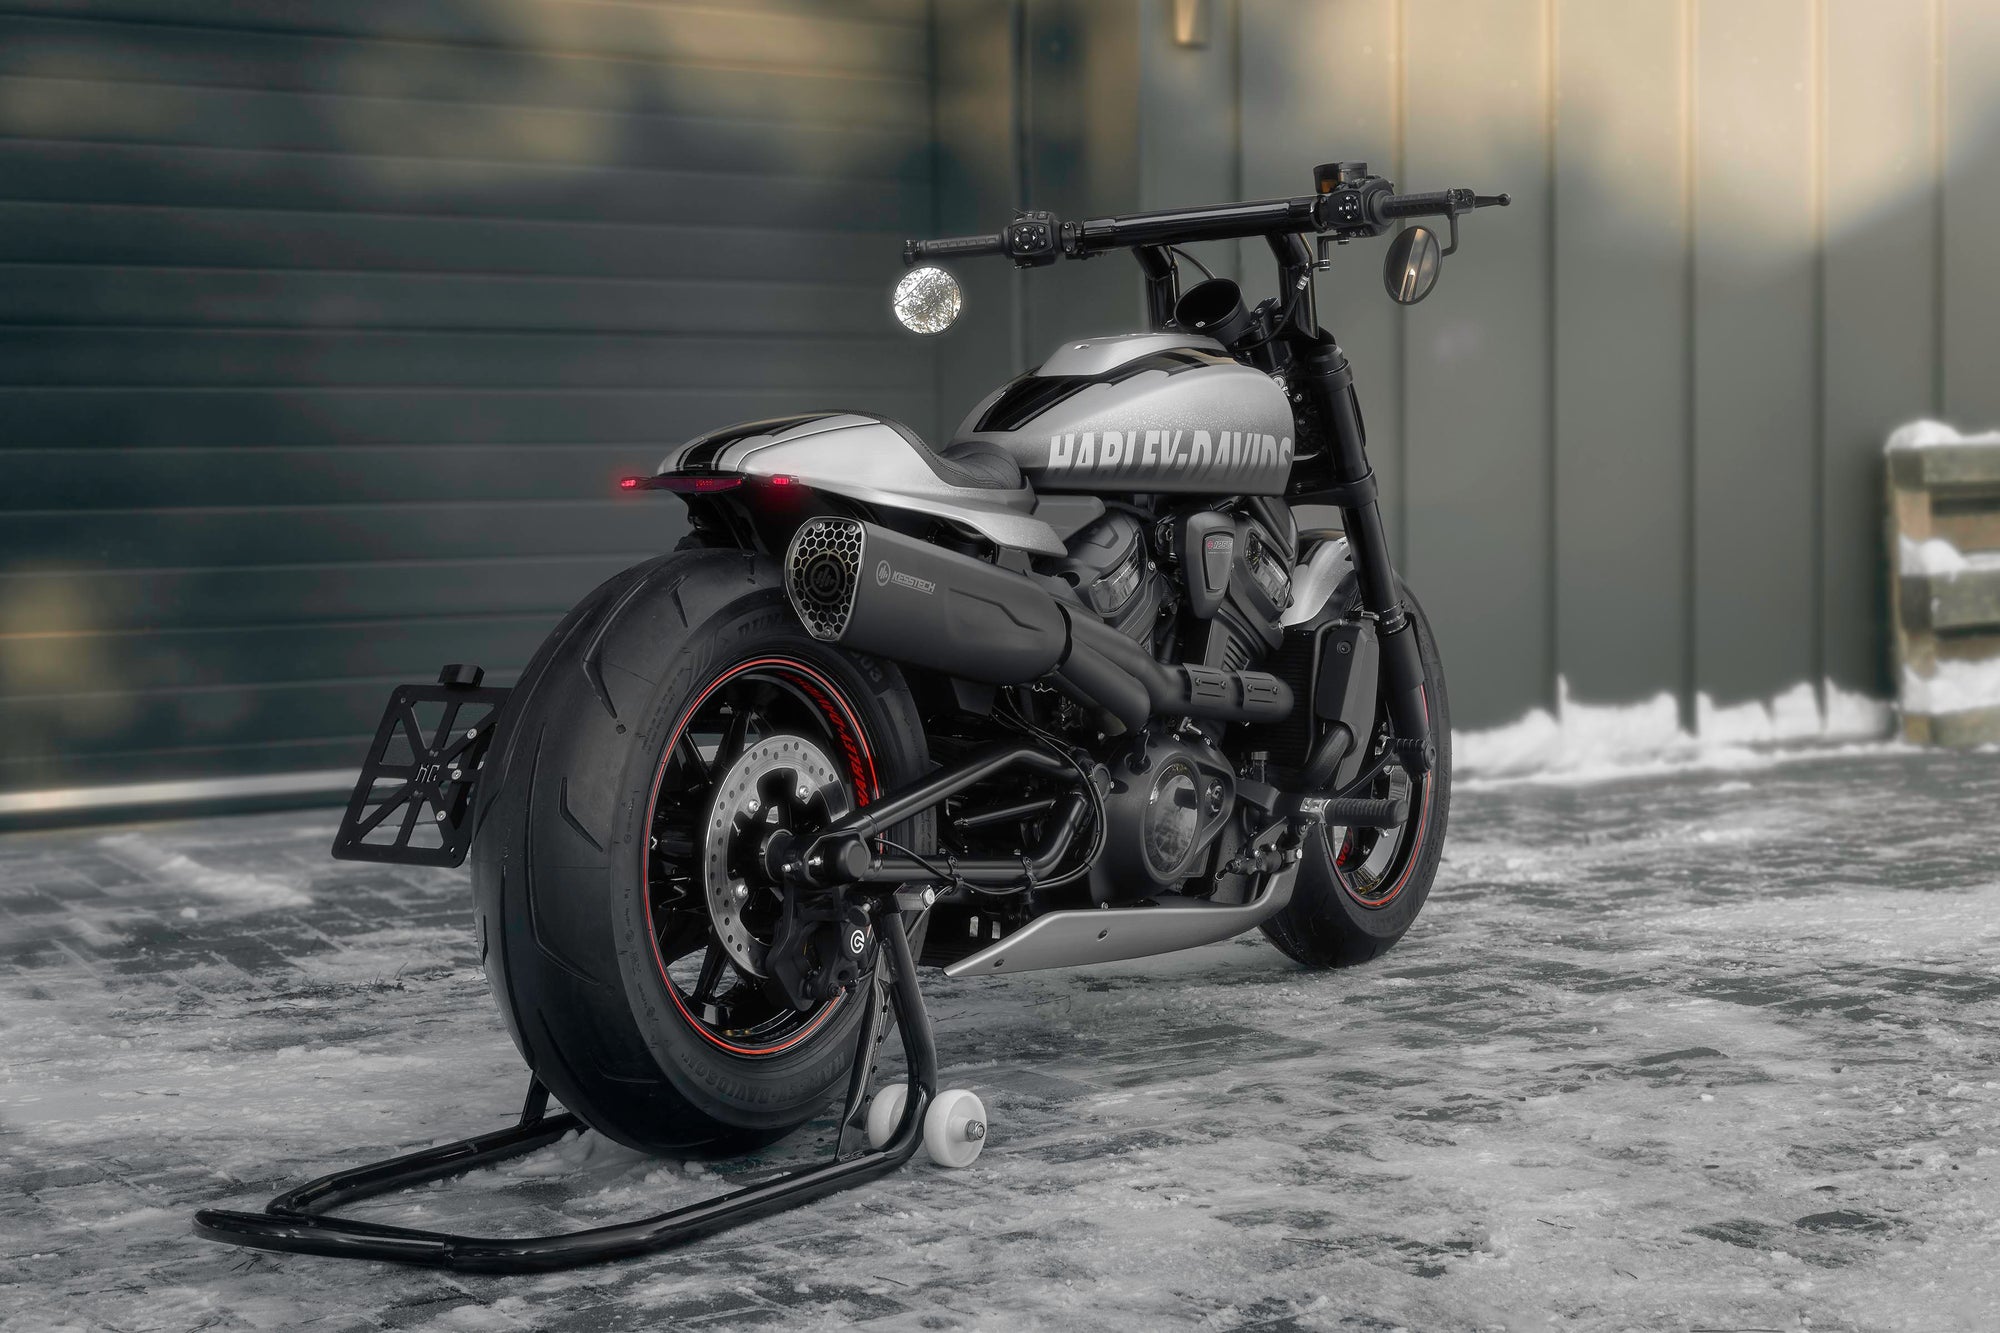 Harley Davidson motorcycle with Killer Custom parts from the side outside with some visible snow and a modern garage in the background